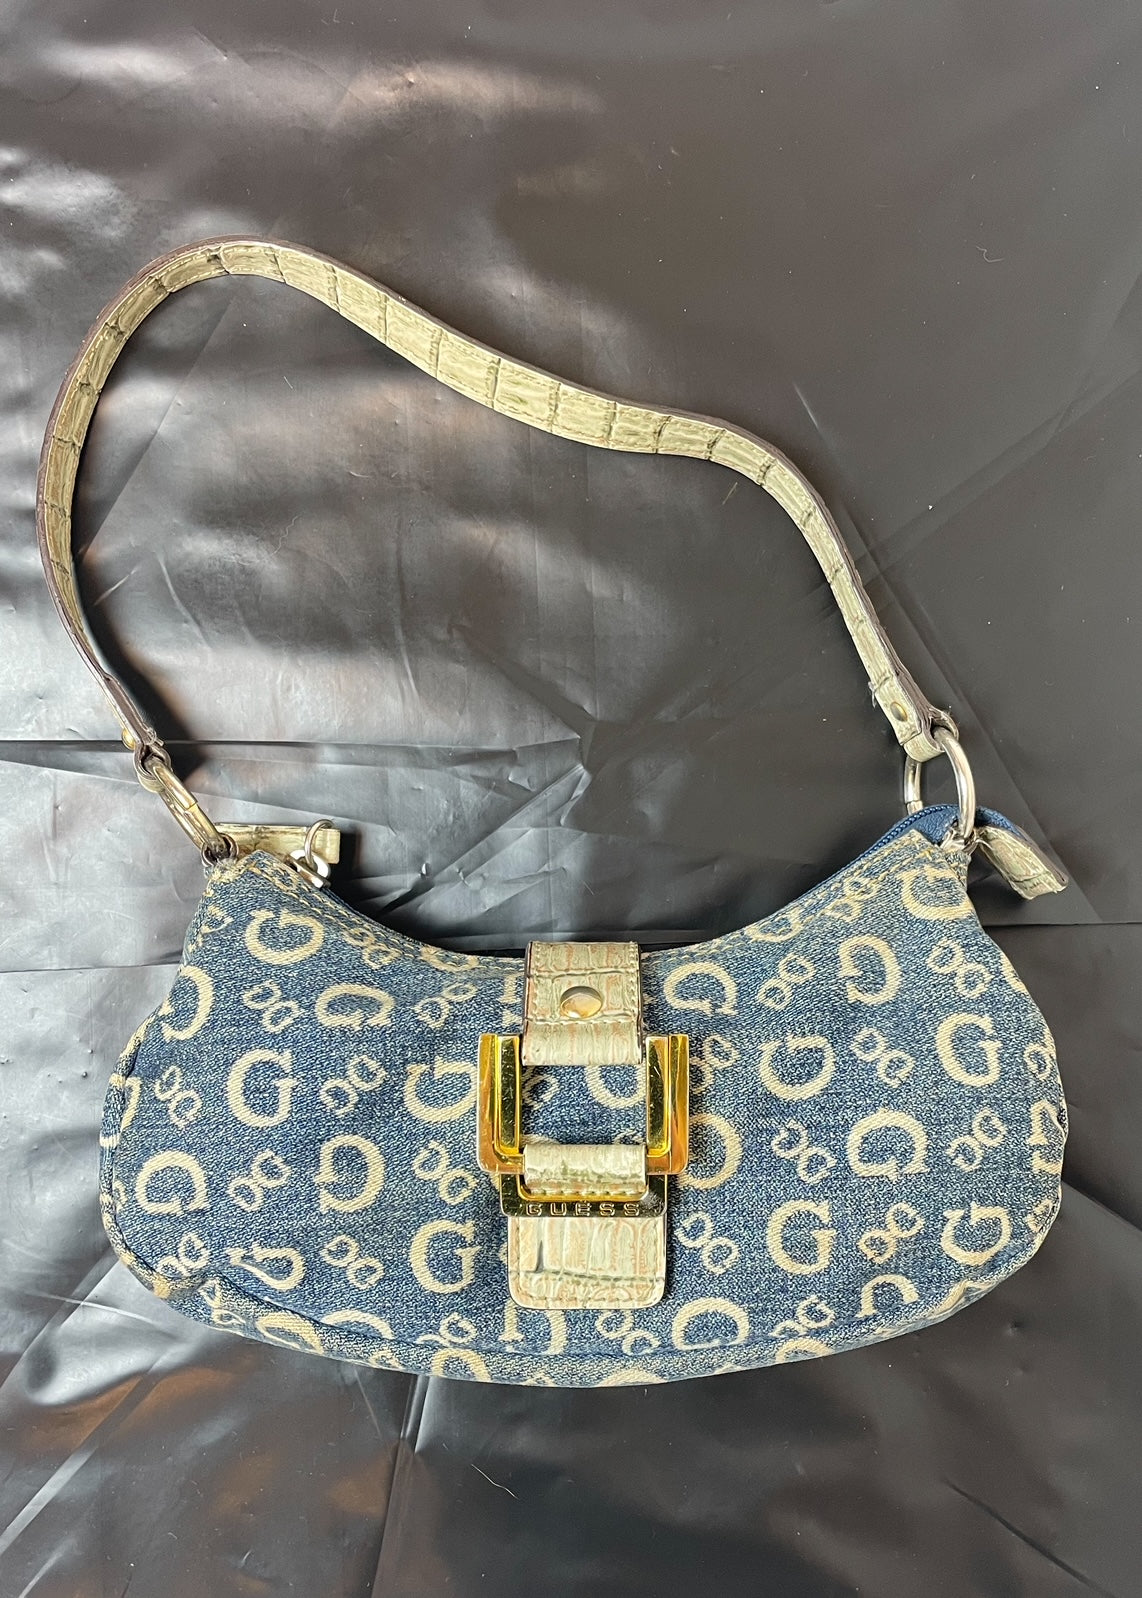 G by GUESS Small Bags & Handbags for Women for sale | eBay